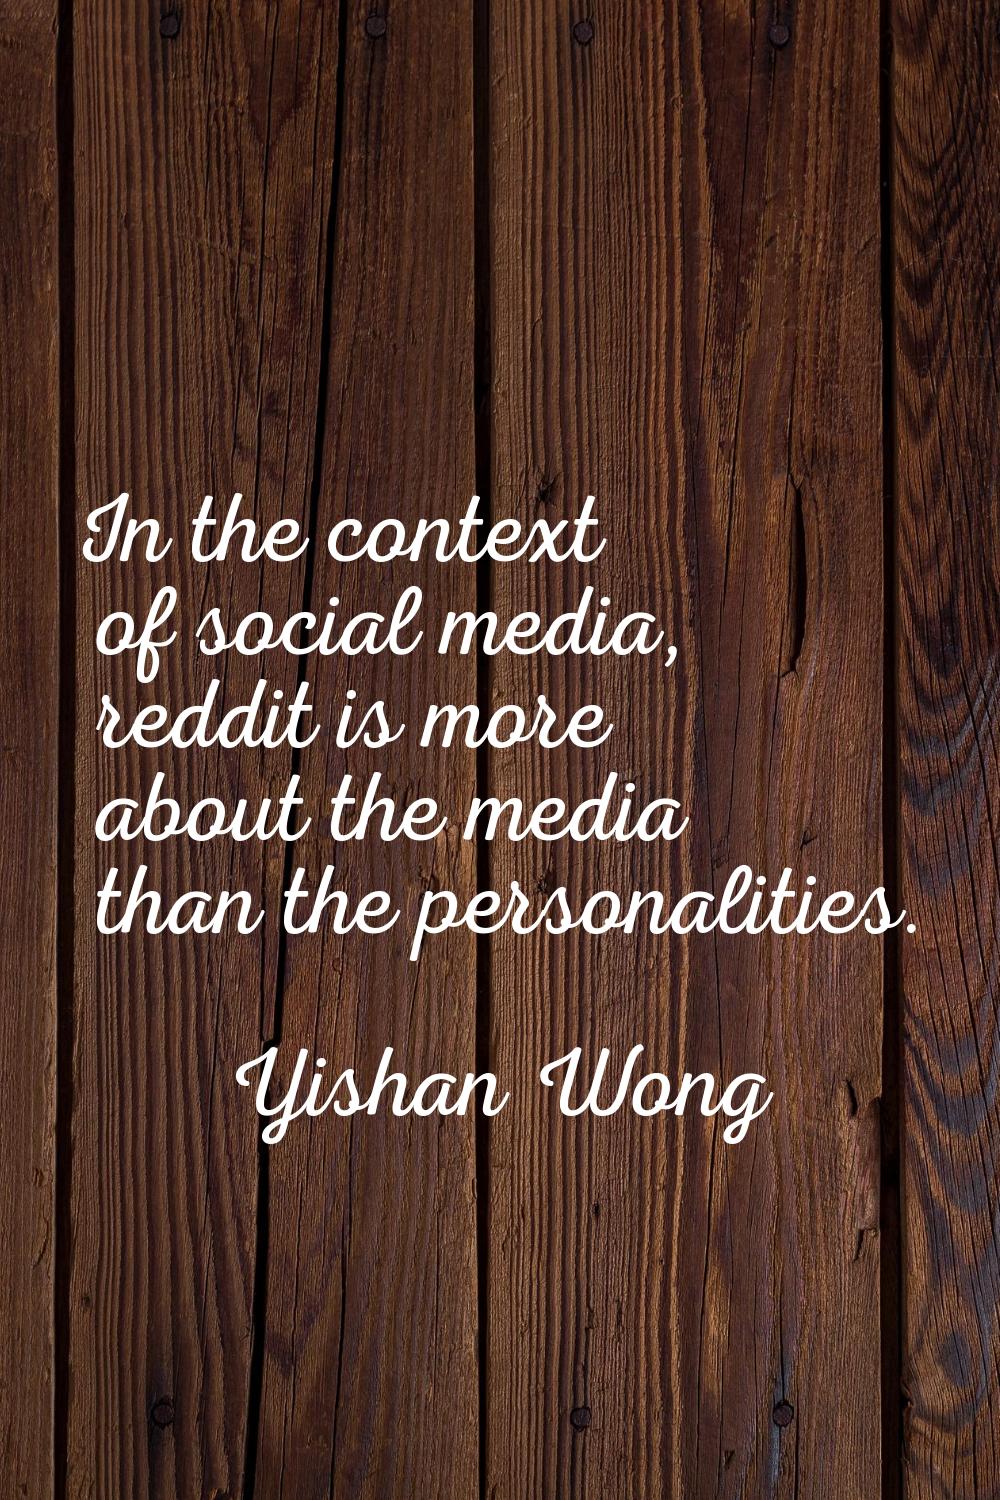 In the context of social media, reddit is more about the media than the personalities.